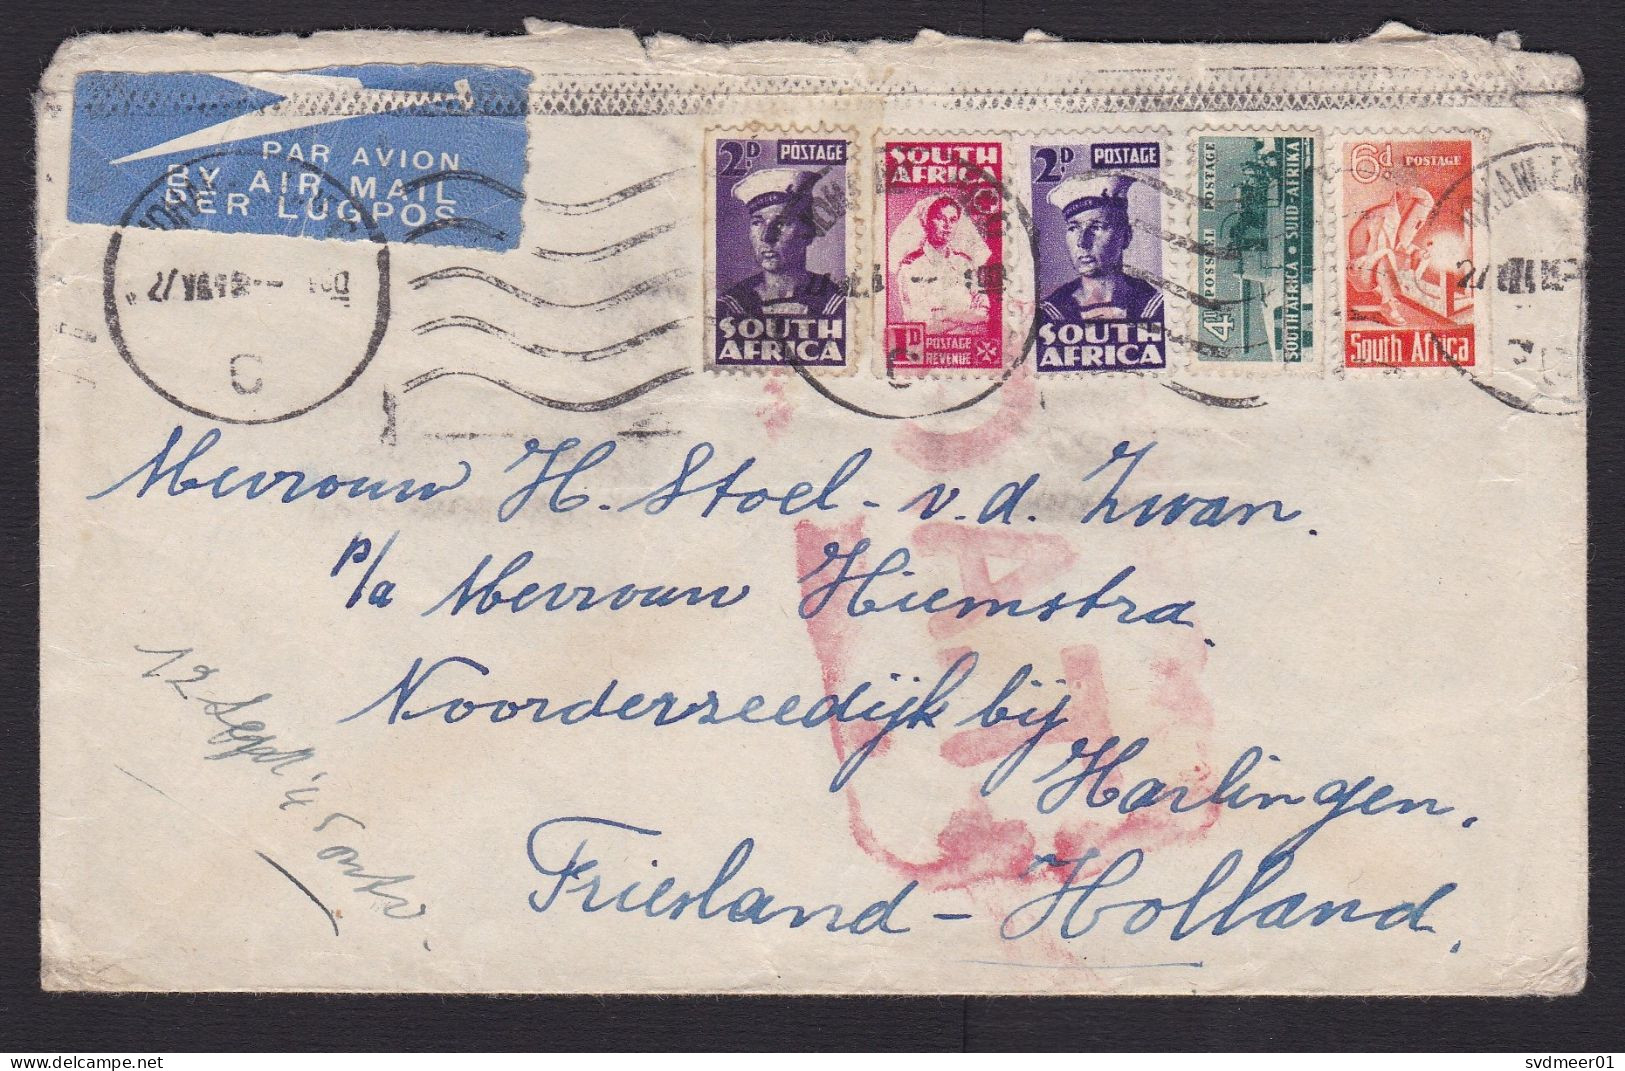 South Africa: Airmail Cover To Netherlands, 1940s, 5 Stamps, War, Rare Red Cancel OAT, Air Transmission (minor Damage) - Covers & Documents